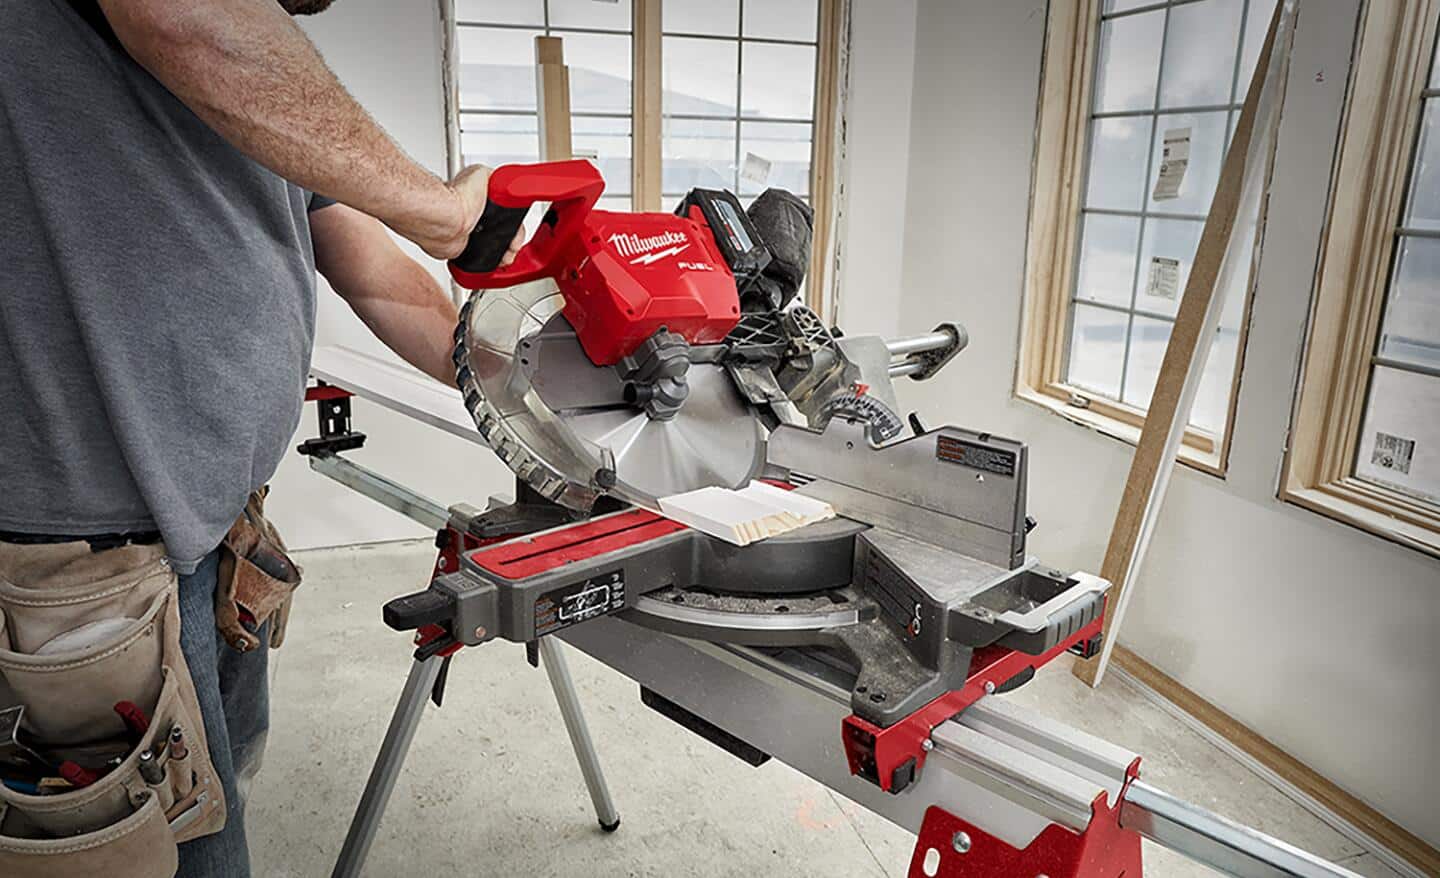 A person tilts a miter saw at an angle to make a bevel cut on a board.